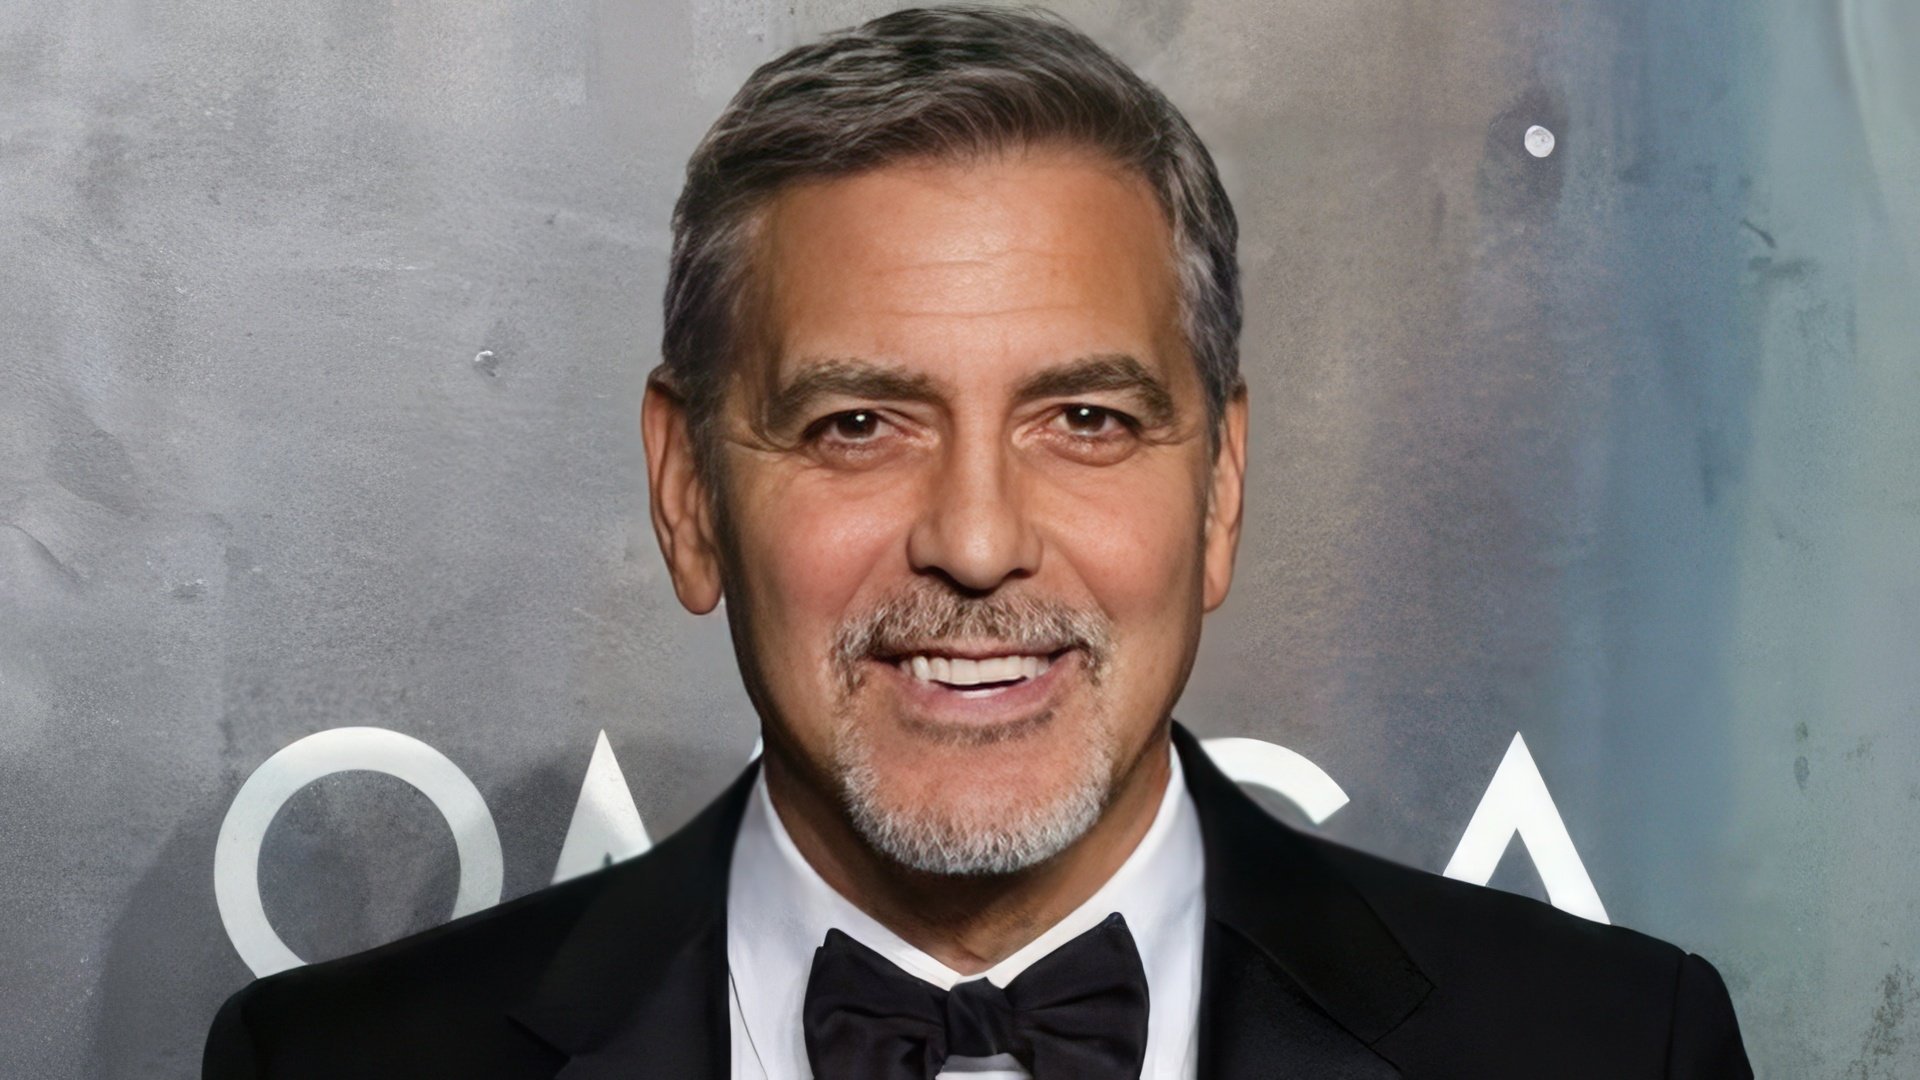 Actor and Director George Clooney